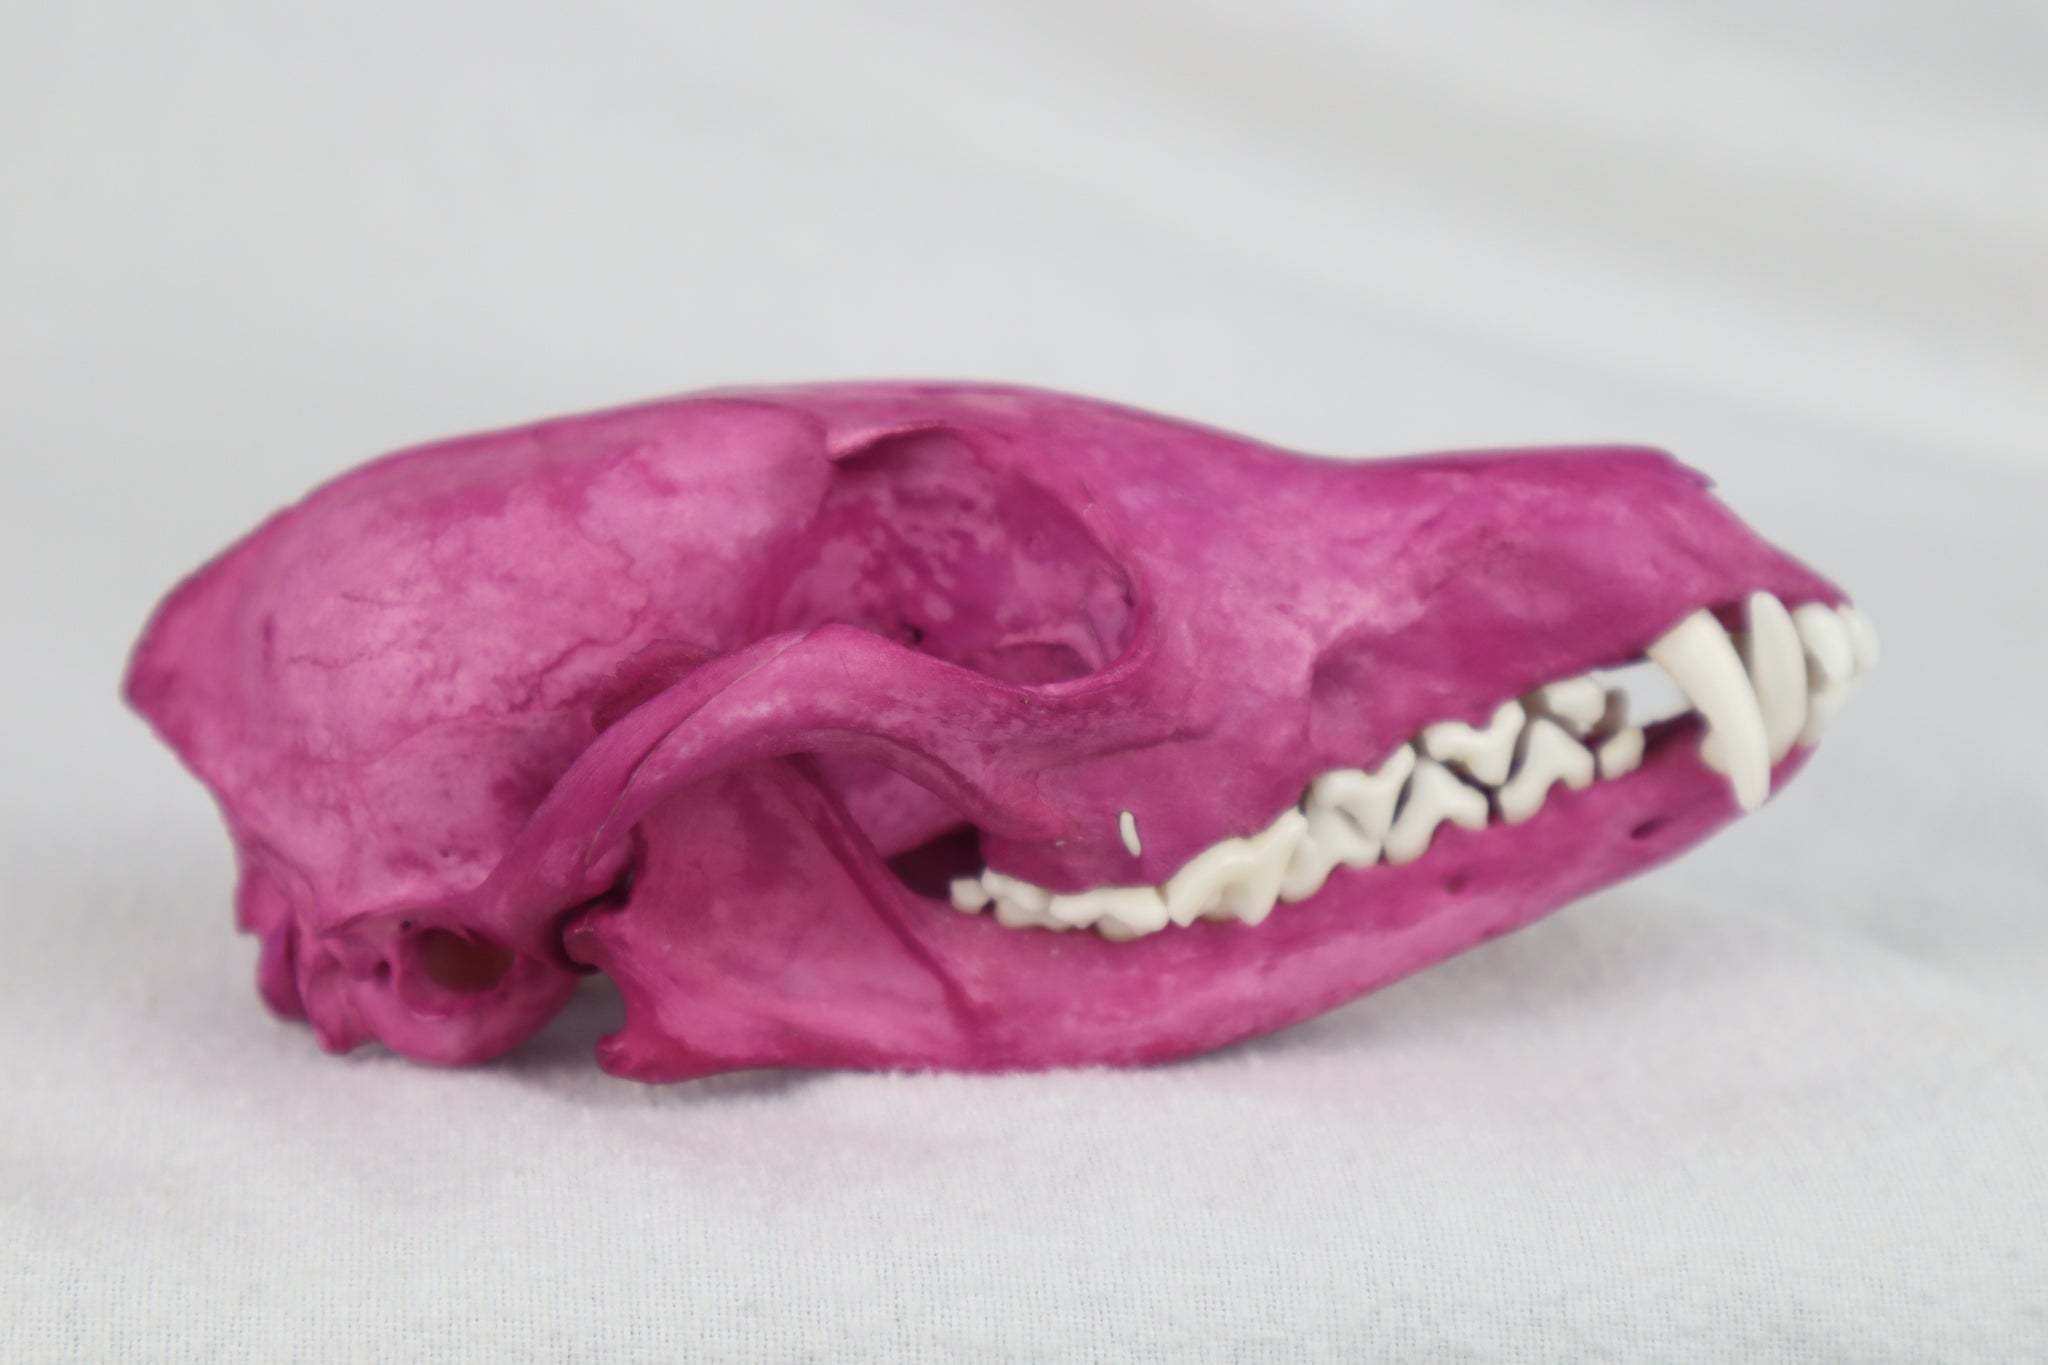 Naturally Stained Red Fox Skull